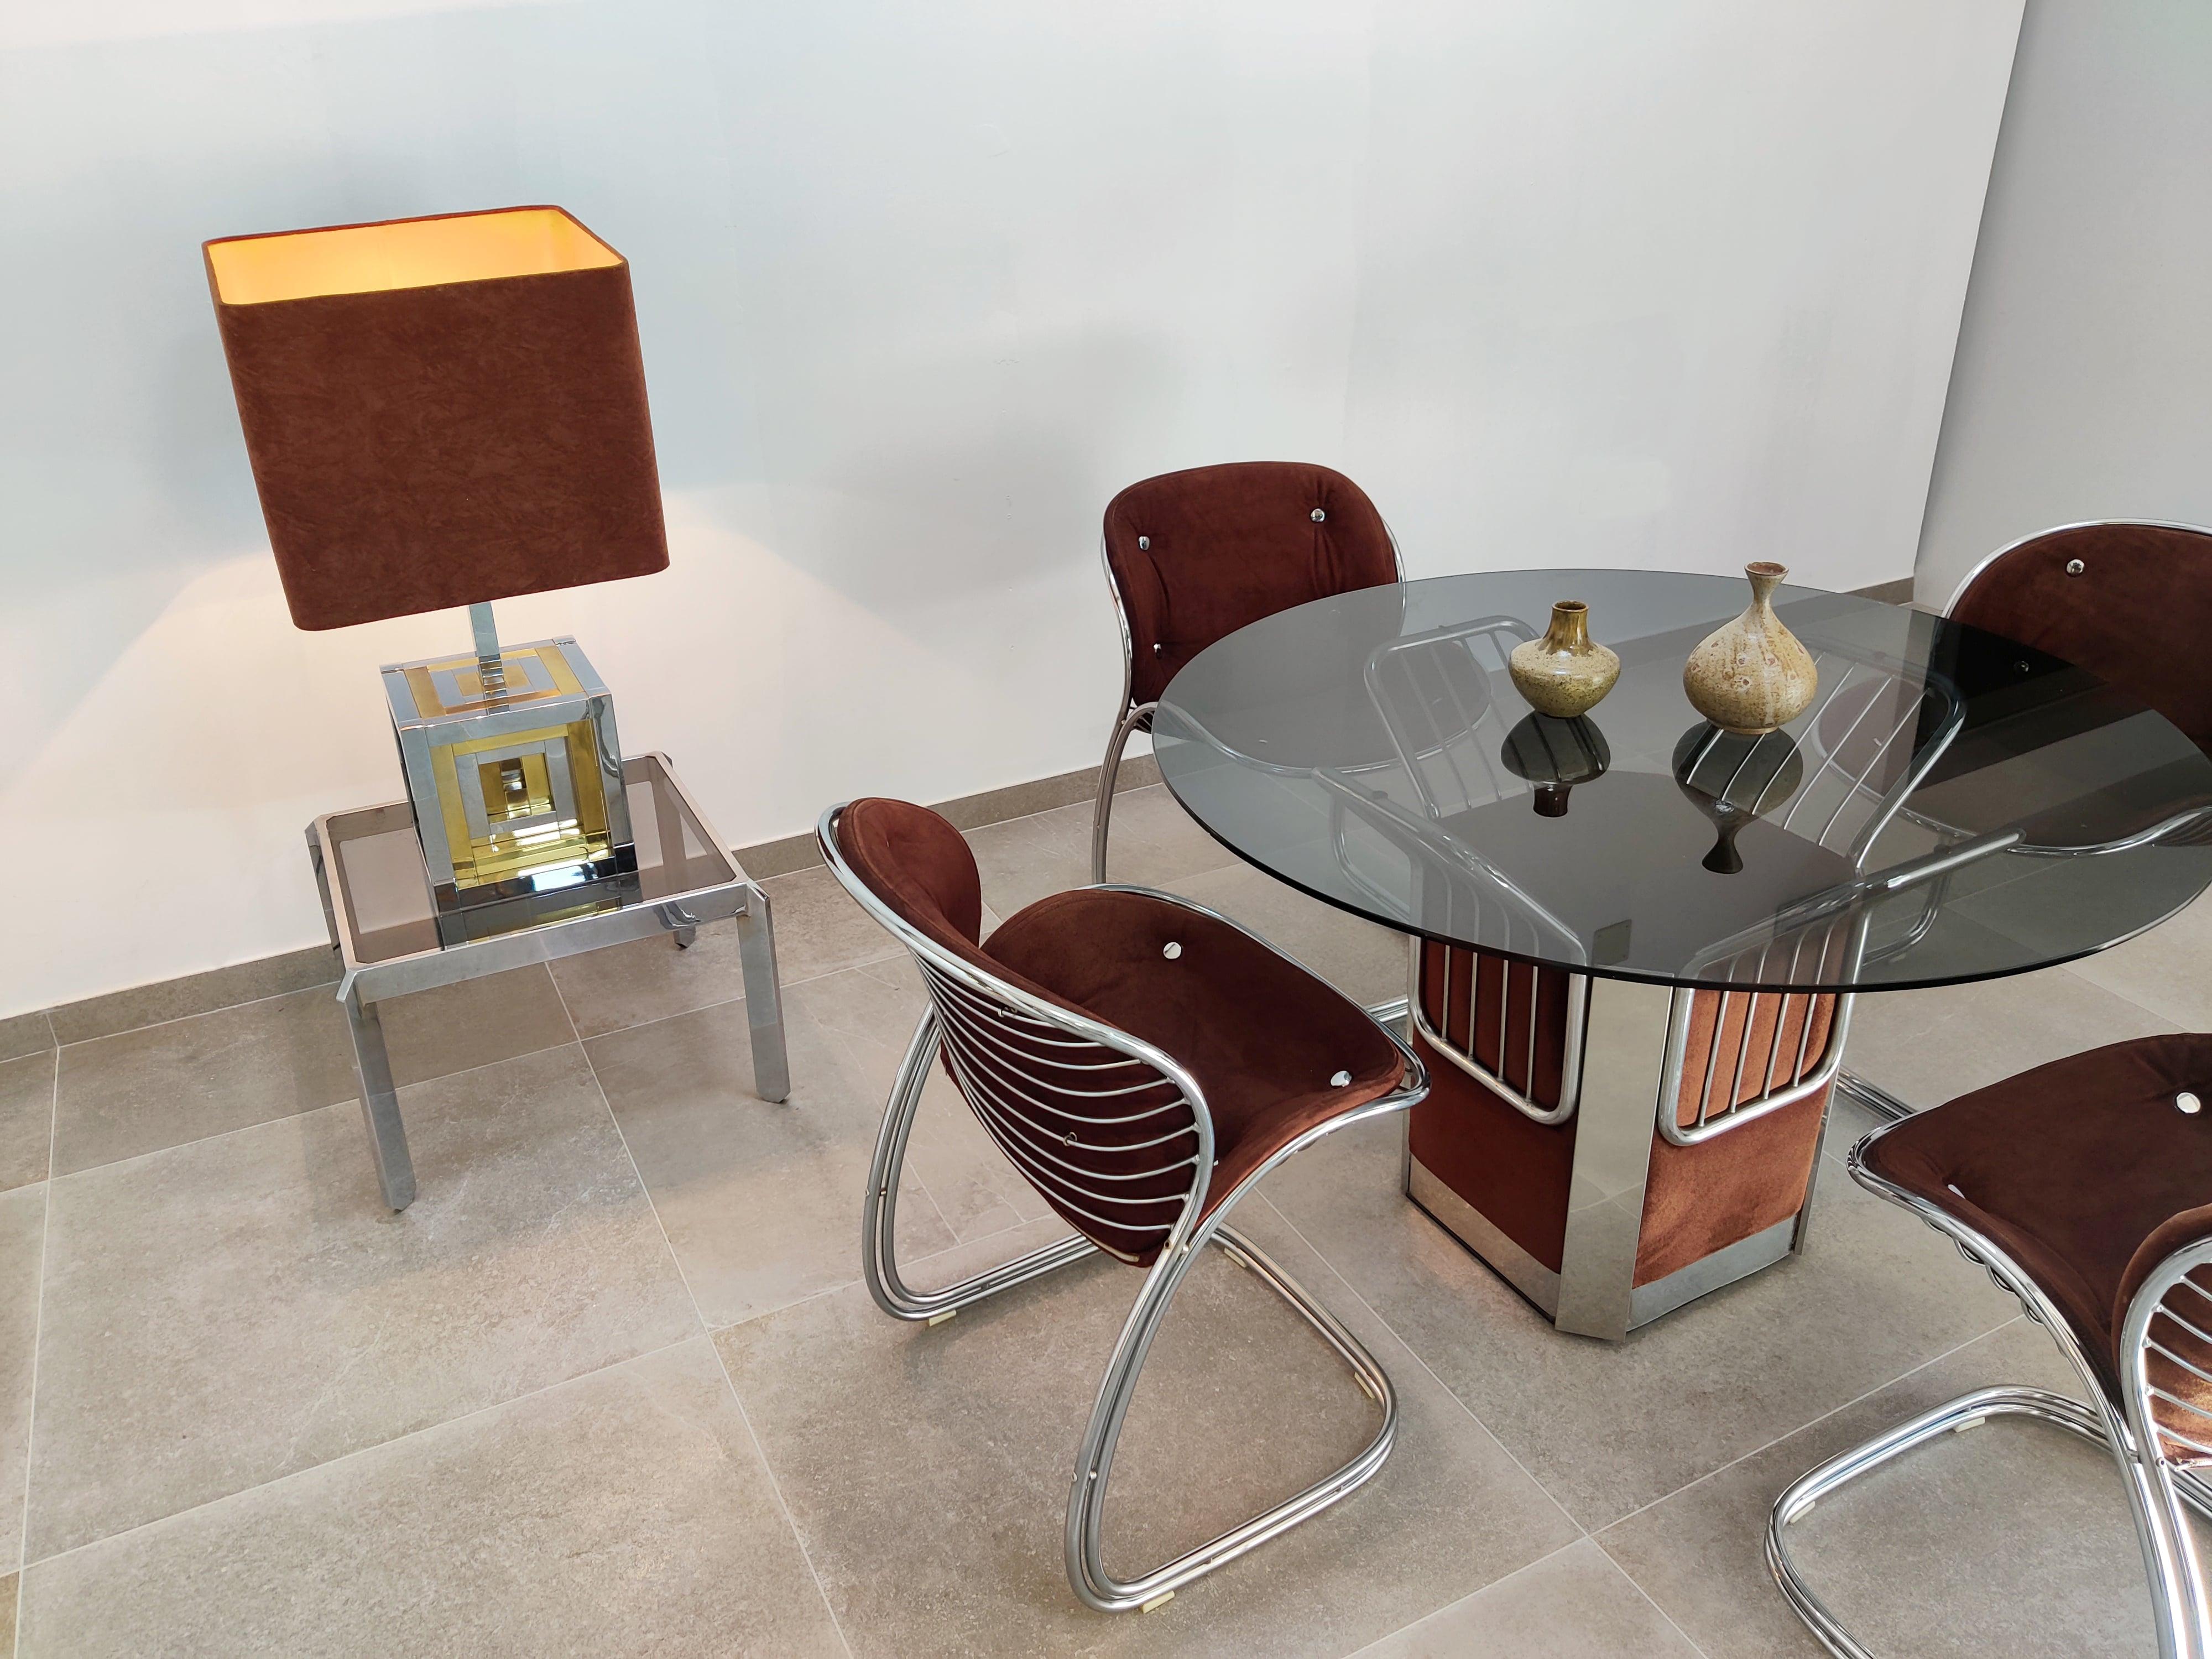 Spectacular set of table and chairs with Sabrina design by Gastone Rinaldi sealed Vidal Grau, with original upholstery.

Dimensions:
Chair: Width 53 cm x height 80 cm x depth 55 cm -- Seat height 50 cm
Table: glass 115 cm x 71.5 cm high.